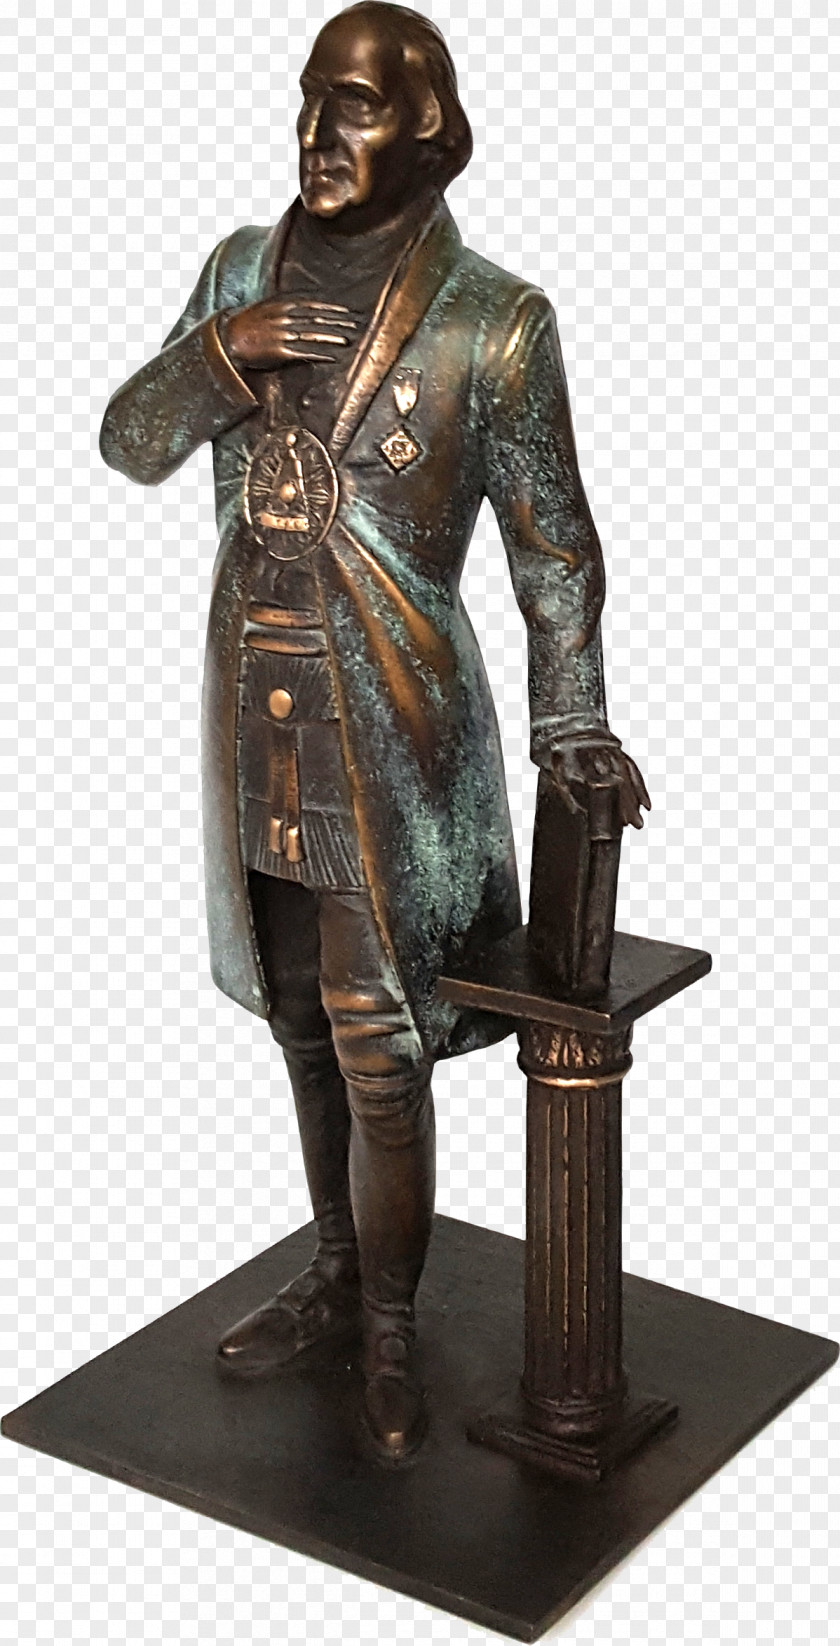 Bronze Sculpture Freemasonry In Germany PNG